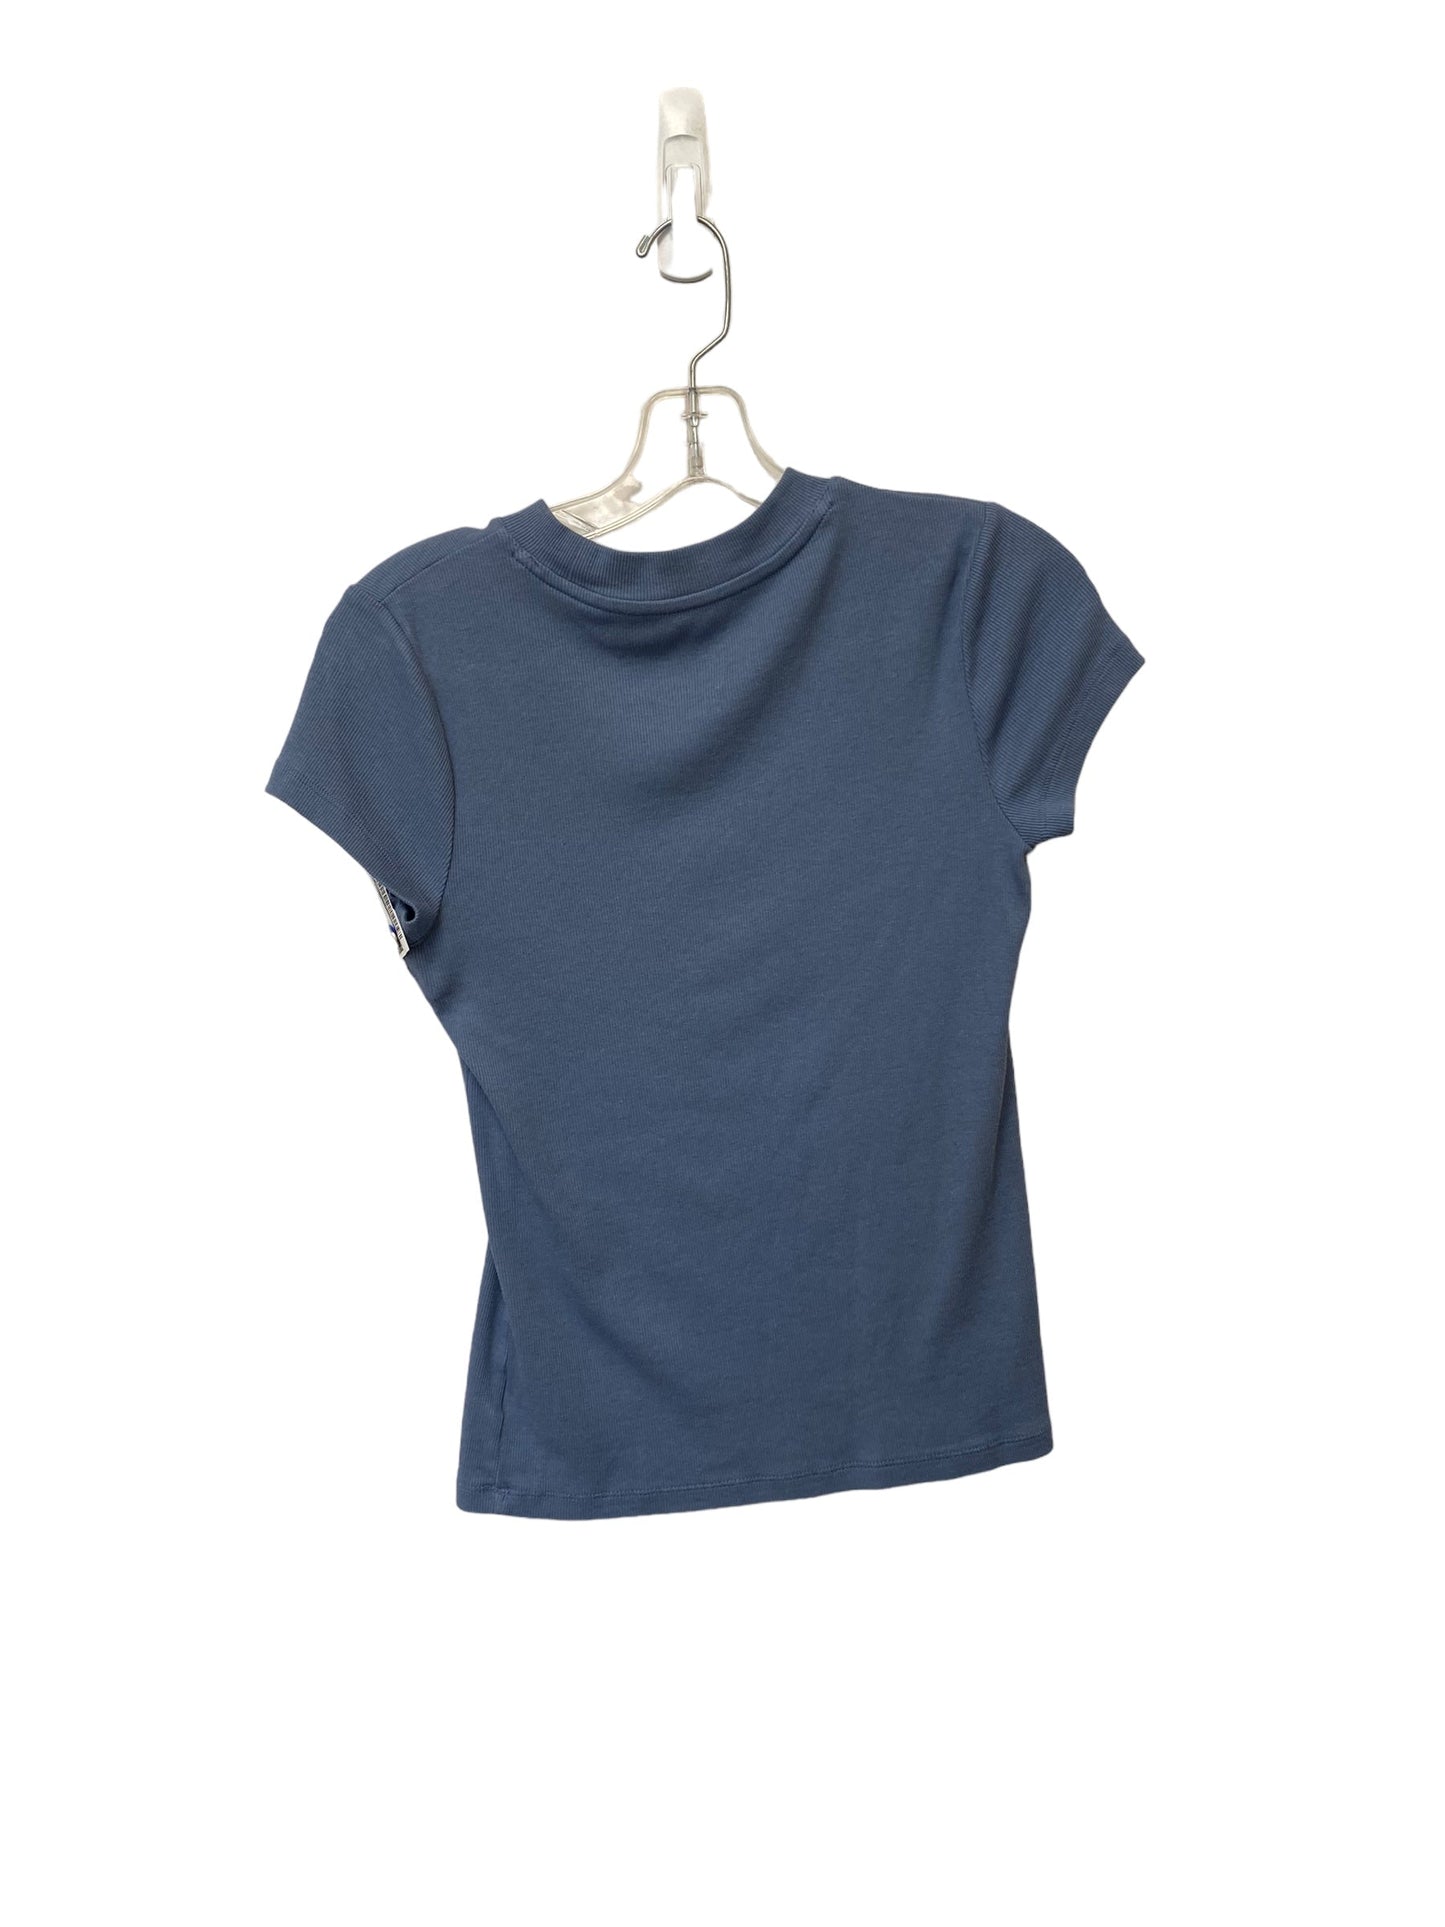 Blue Top Short Sleeve Basic A New Day, Size S